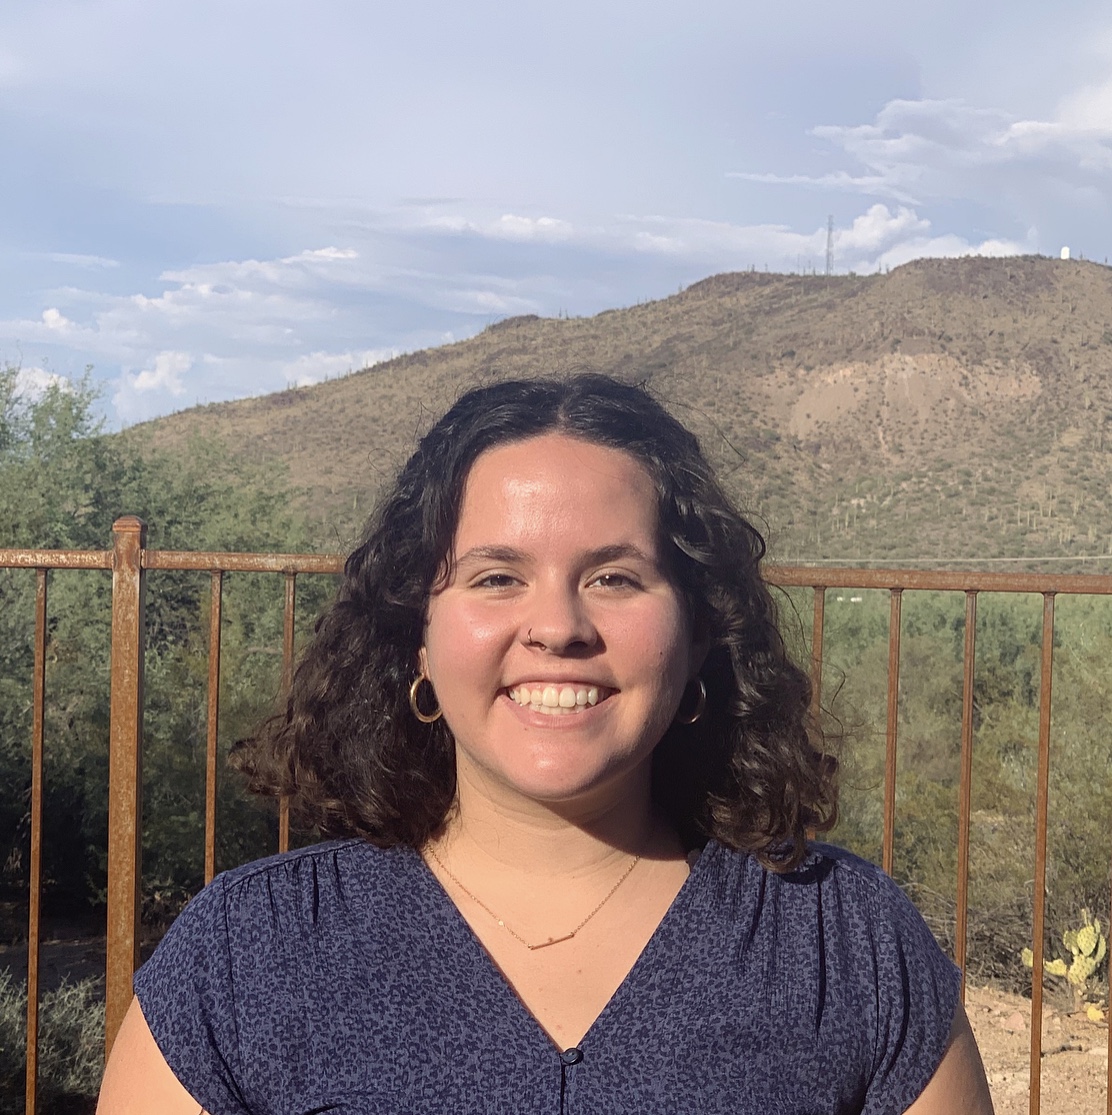  @Jessica13Sims (she/her) is also an ASU student and she’s excited to work to elect better leaders for her community. Check out her upcoming events:  https://bit.ly/35JCCjZ  and  https://bit.ly/35FM5IZ 